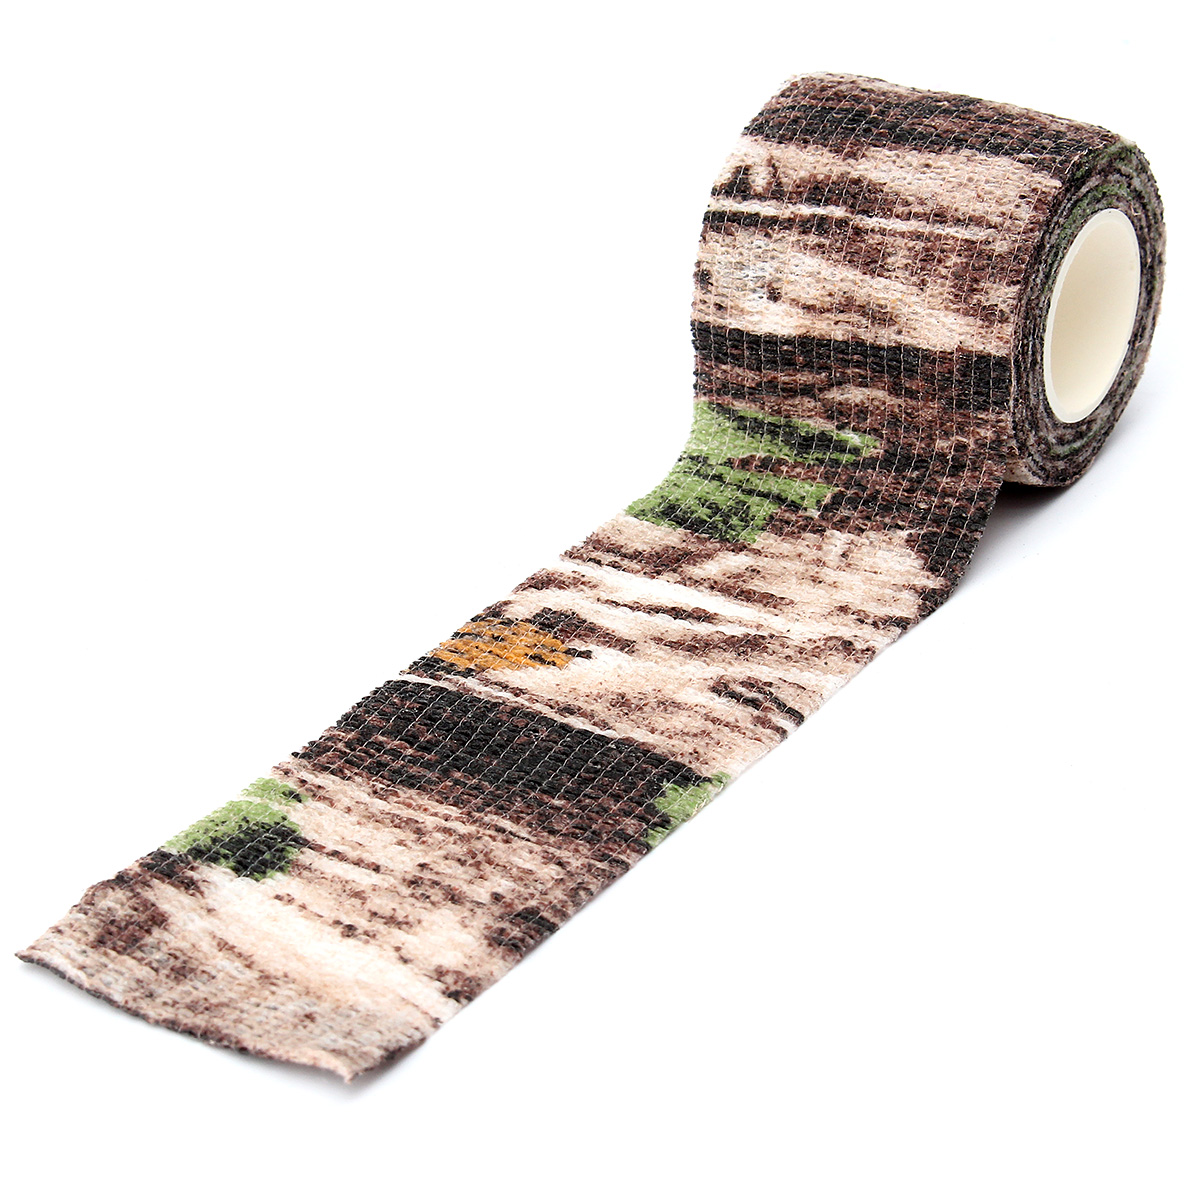 5CM-X-45-Military-Camouflage-Camo-Tape-Stealth-Wrap-Hunting-Camping-Waterproof-1135413-4